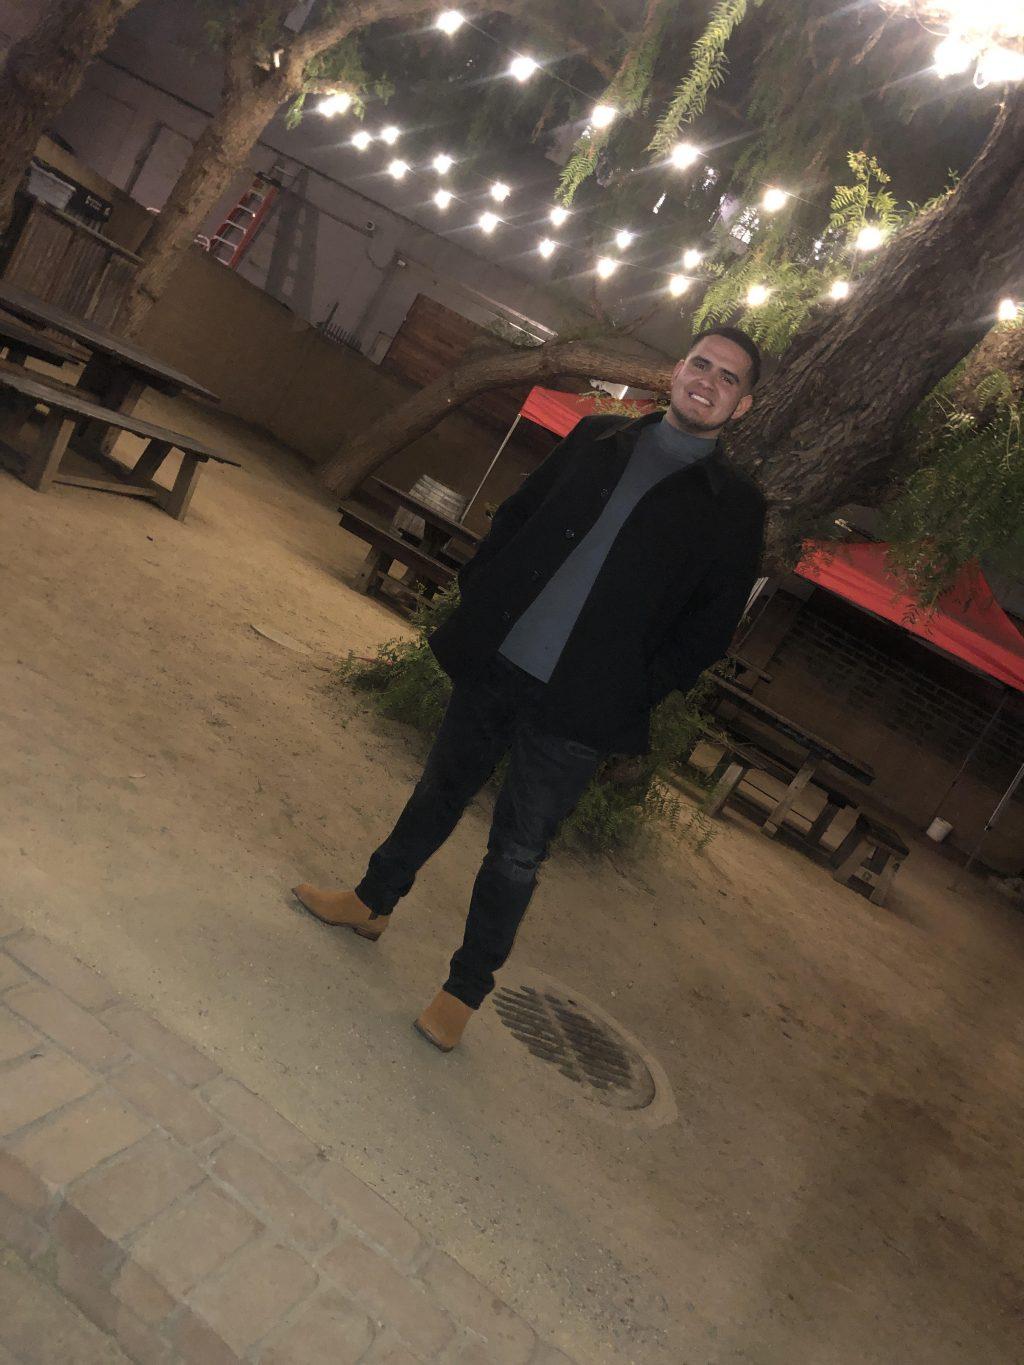 Garcia smiles in front of a restaurant. He said he hopes to make meaningful connections at Pepperdine.